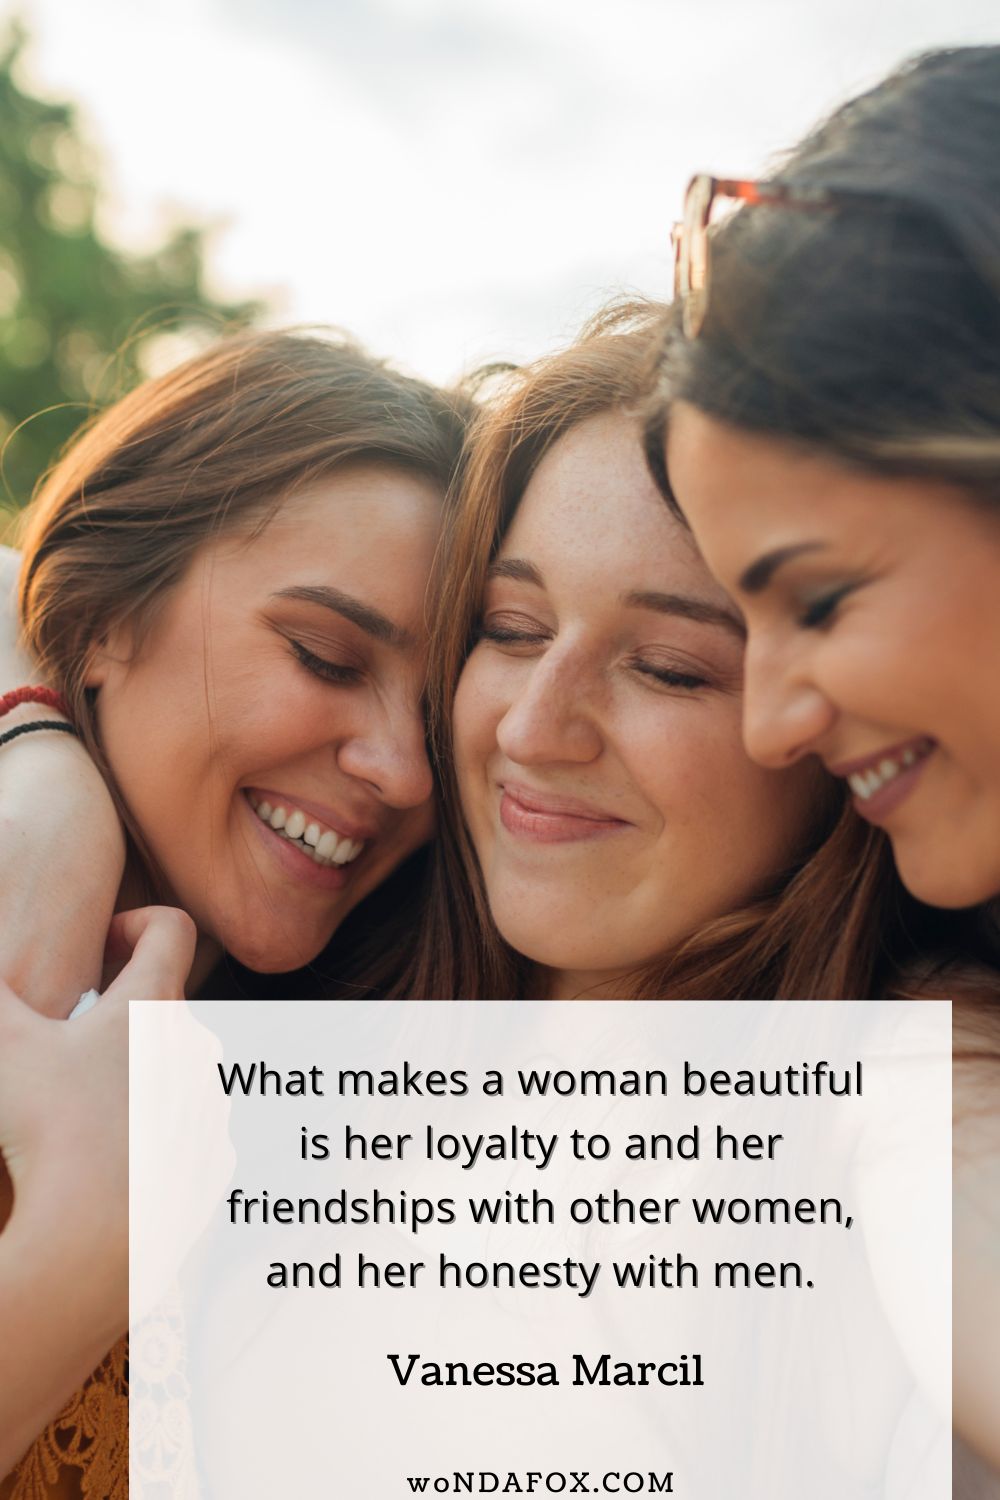 “What makes a woman beautiful is her loyalty to and her friendships with other women, and her honesty with men.” 